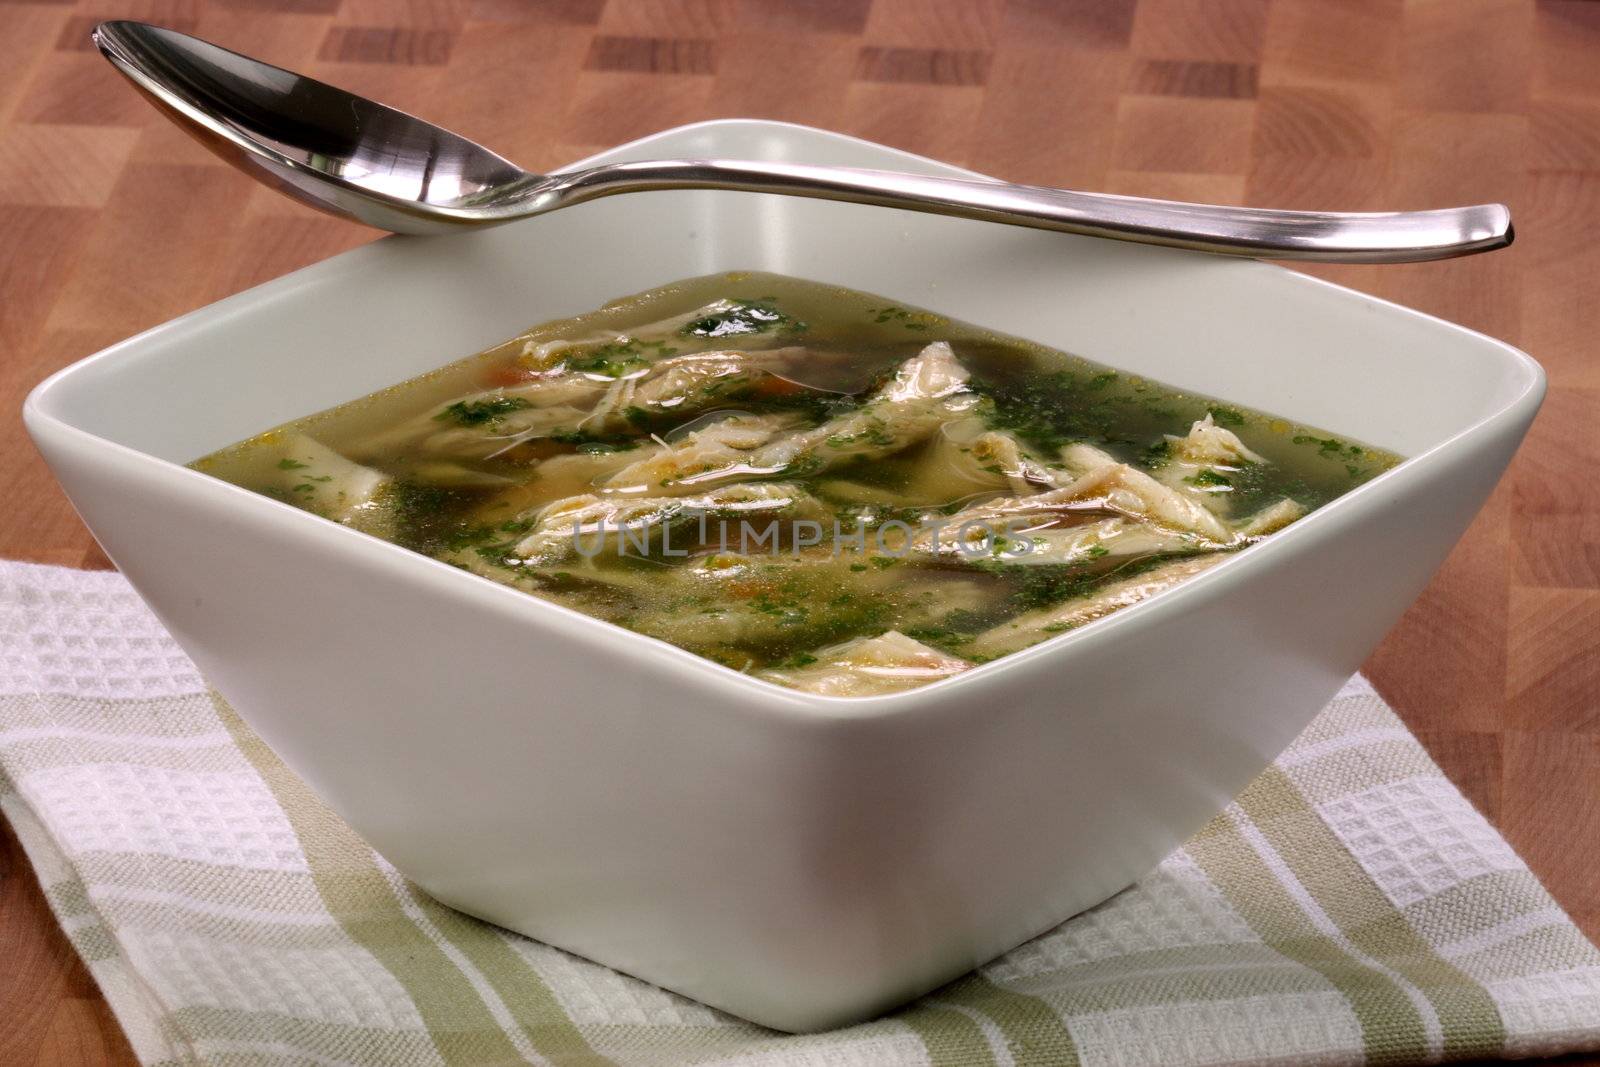 chicken breast and vegetables soup  made with low sodium  broth,  on fine wood table table.